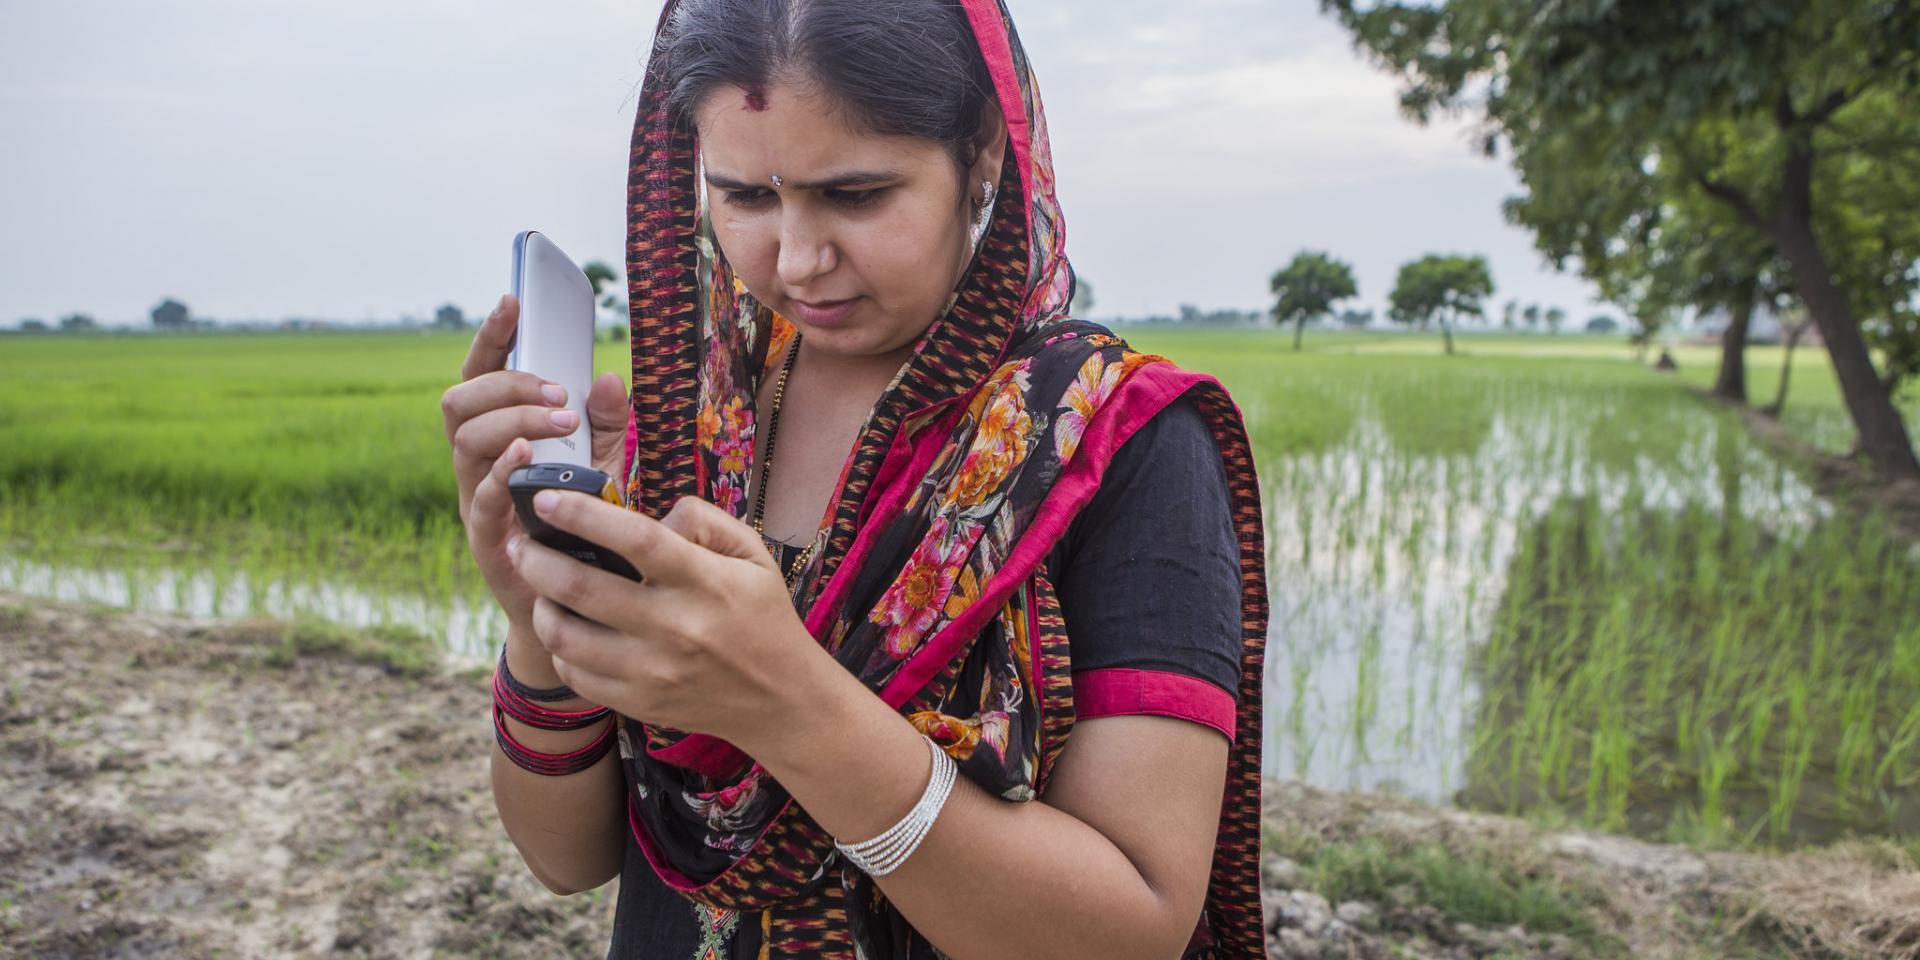 Woman getting weather information via cellphone in India